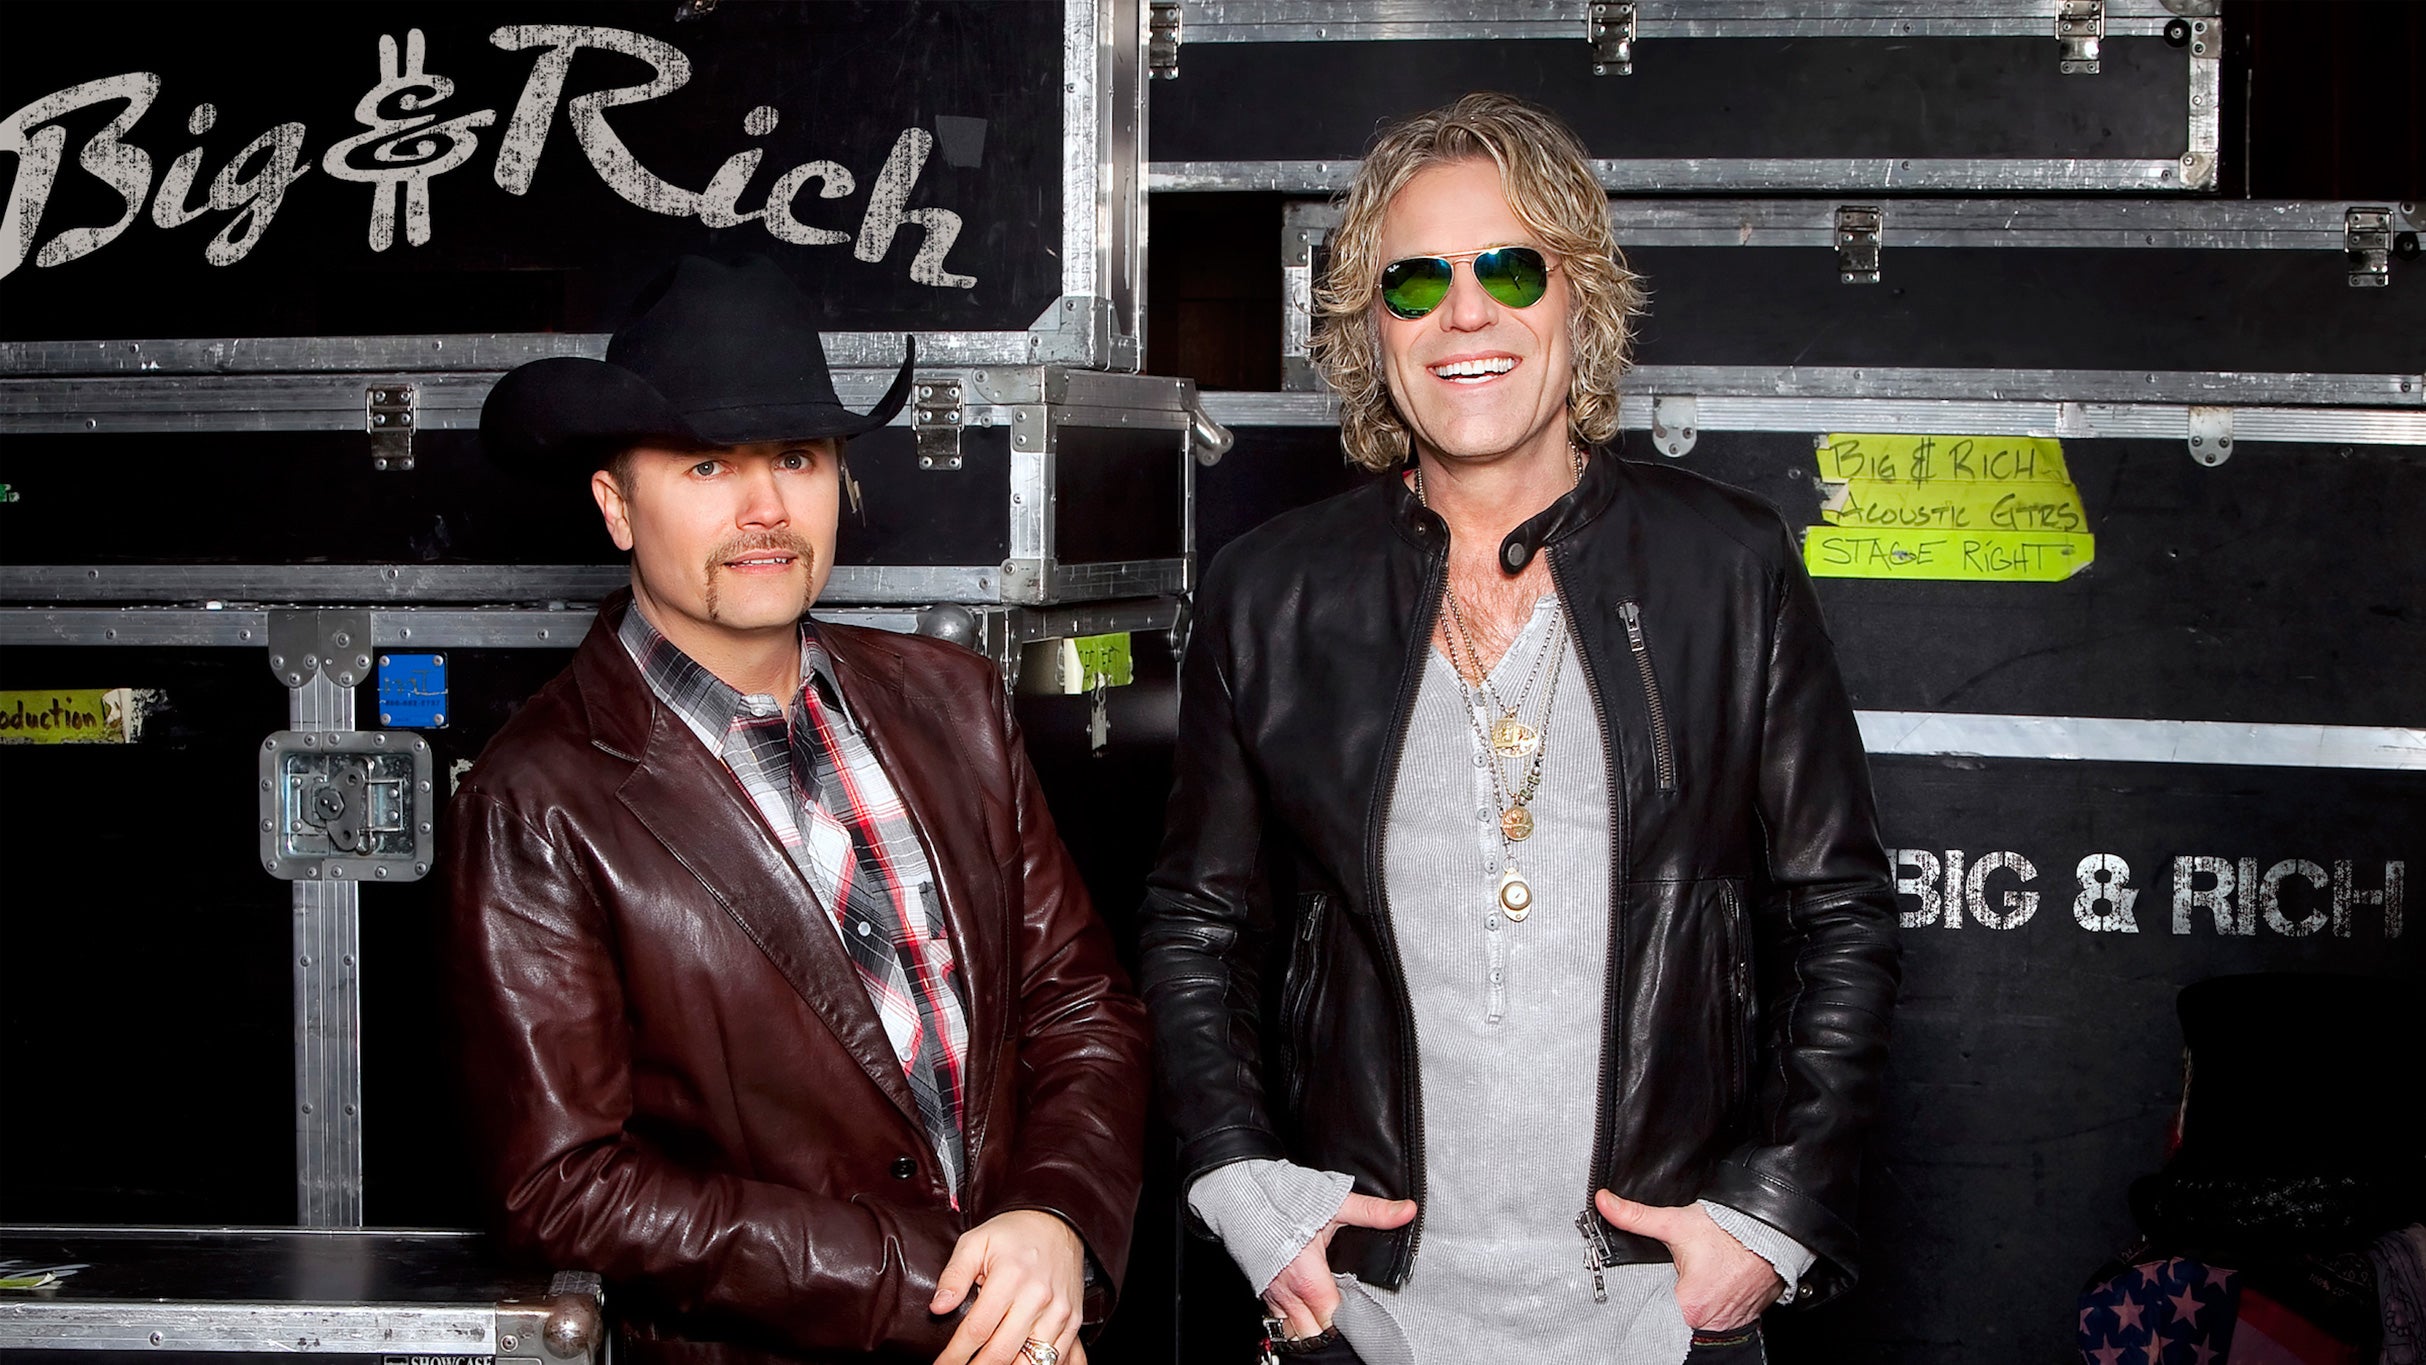 Big & Rich featuring Gretchen Wilson presale password for early tickets in Verona